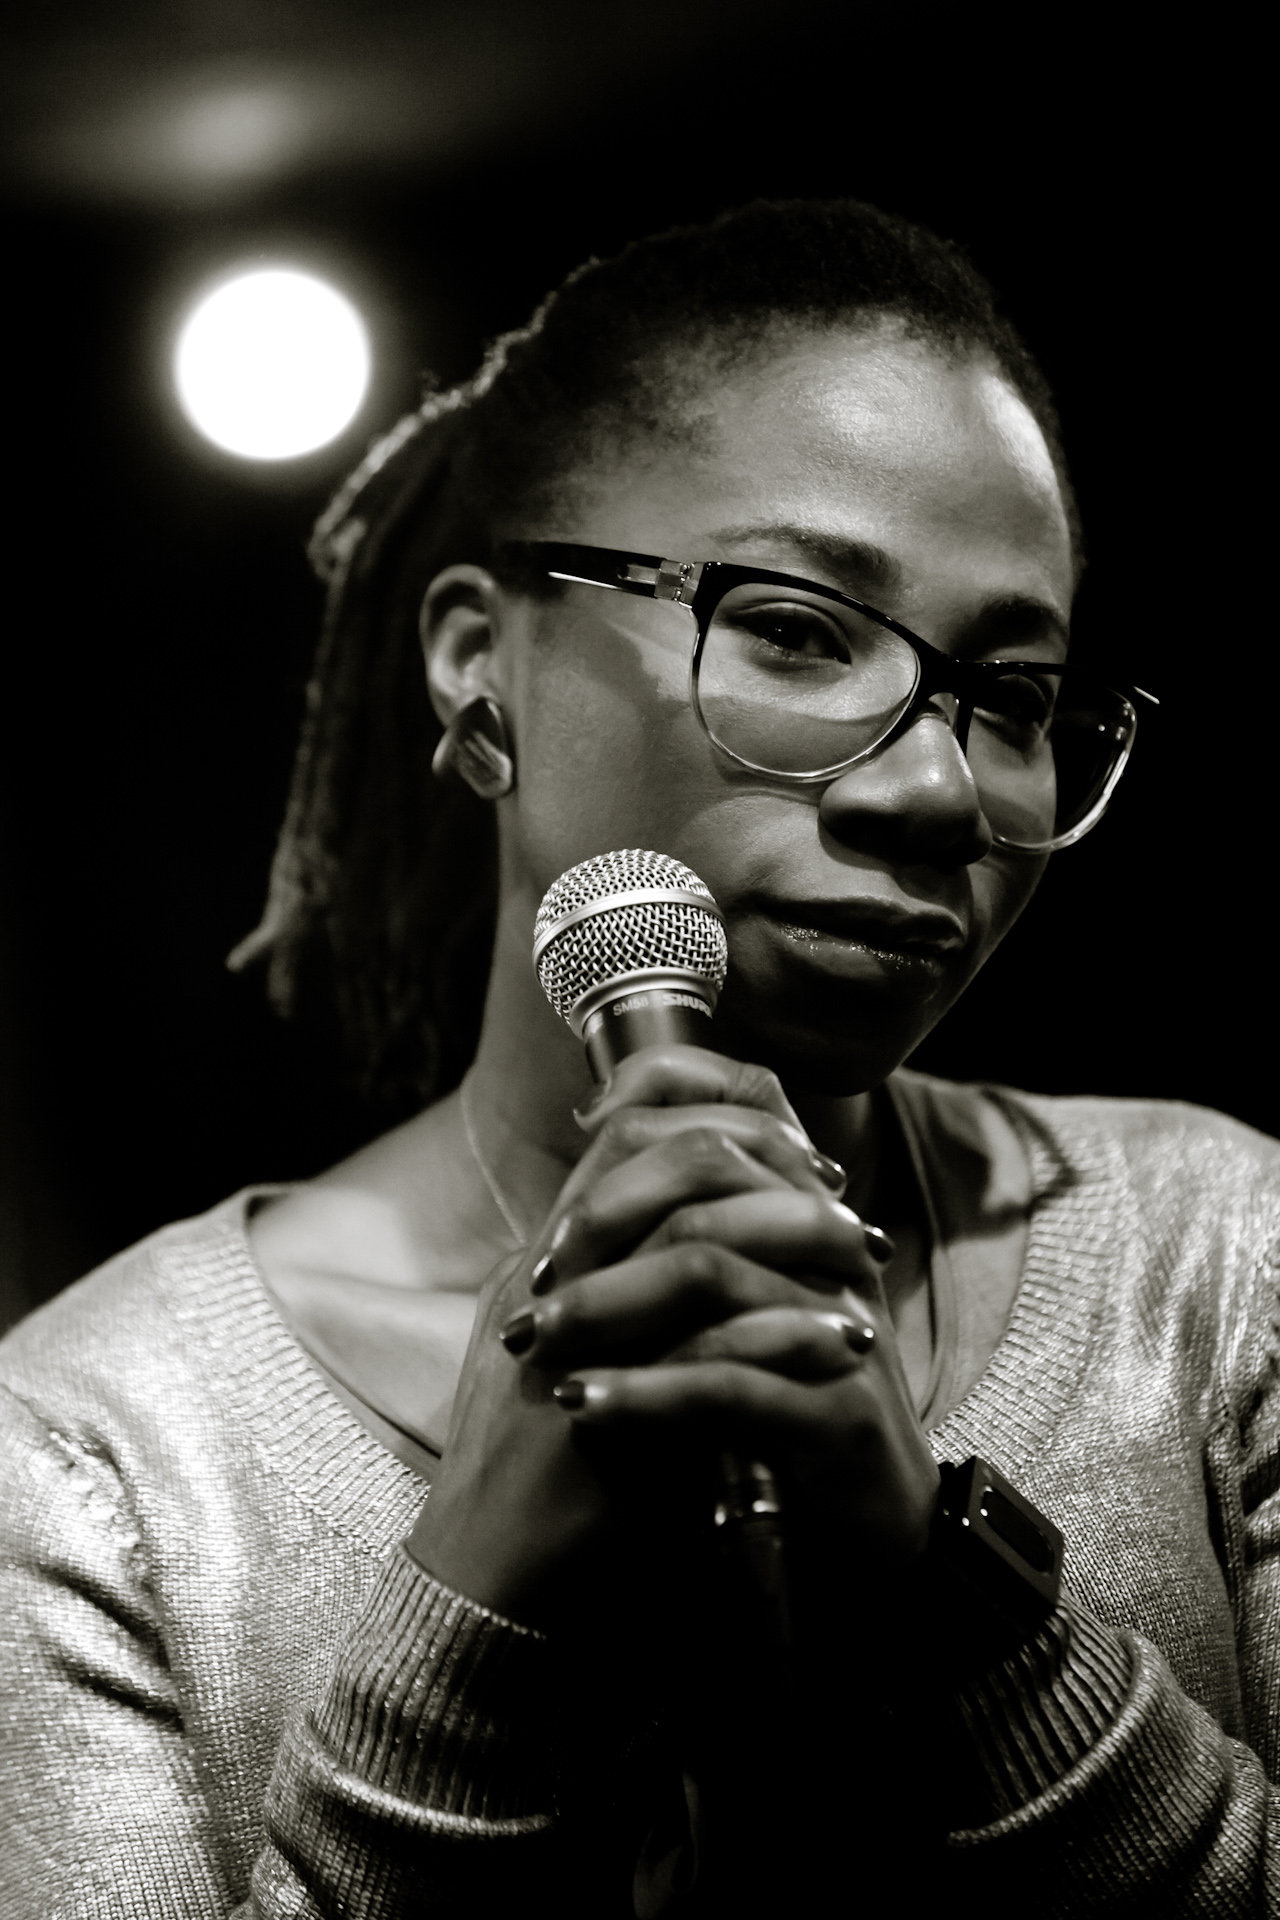 A black and white photo of the singer Asa. She is holding a microphone with both hands and looking off camera.